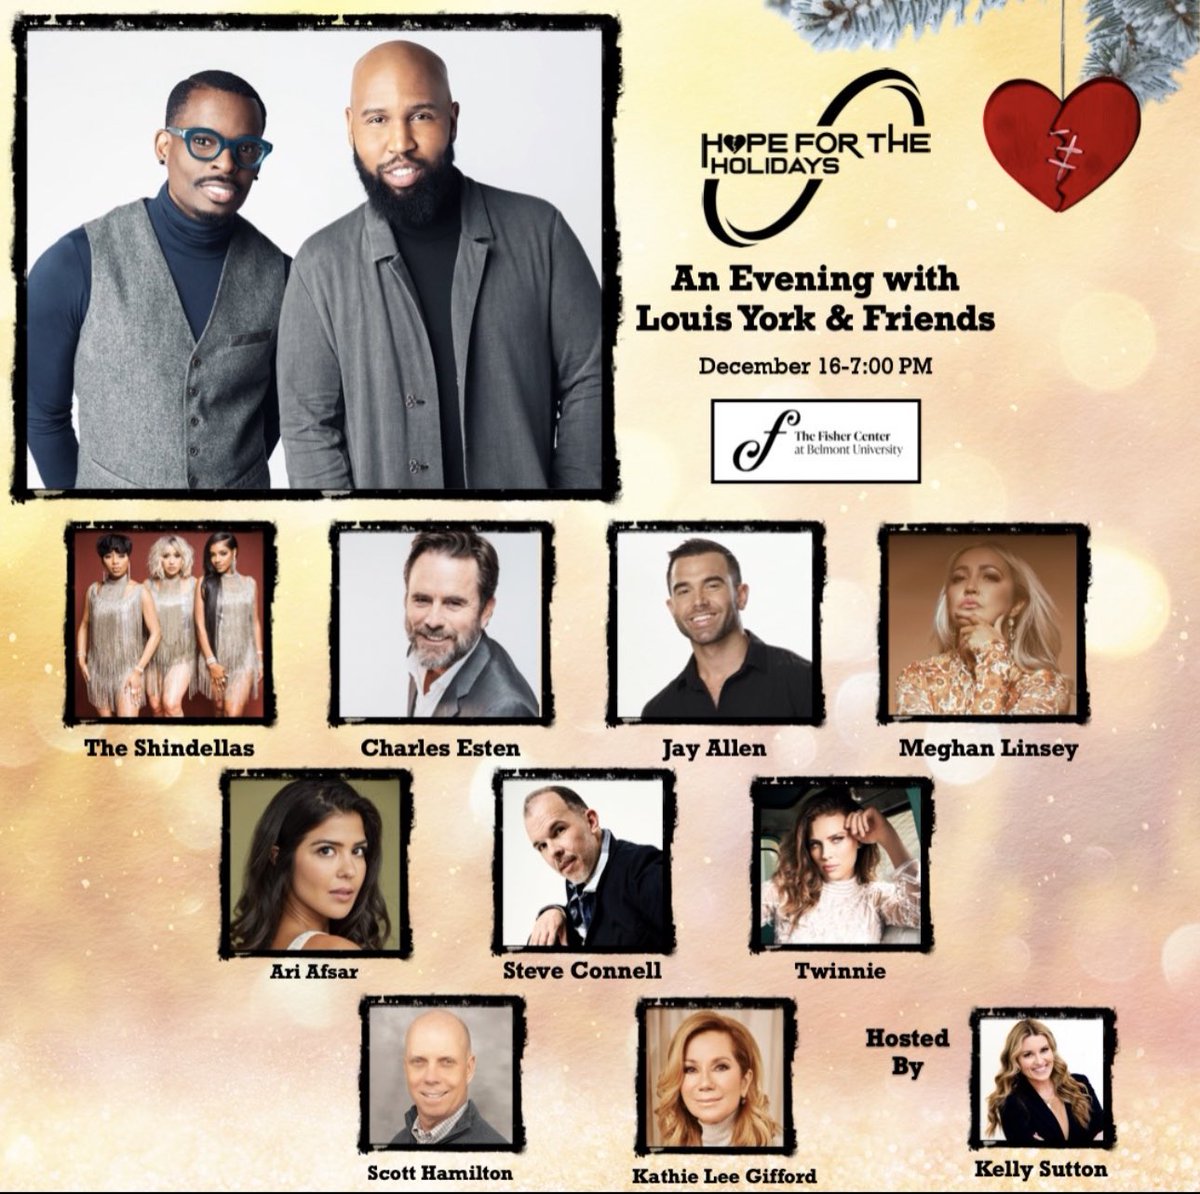 Hope for the Holidays - An Evening with Louis York & Friends at @thefishercenter in Nashville, TN on December 16th at 7:00pm. 

GET YOUR TIX now at hope4holidaysnash.com.  

⭐️Use promo code FirstHope and get 15% off your tickets!